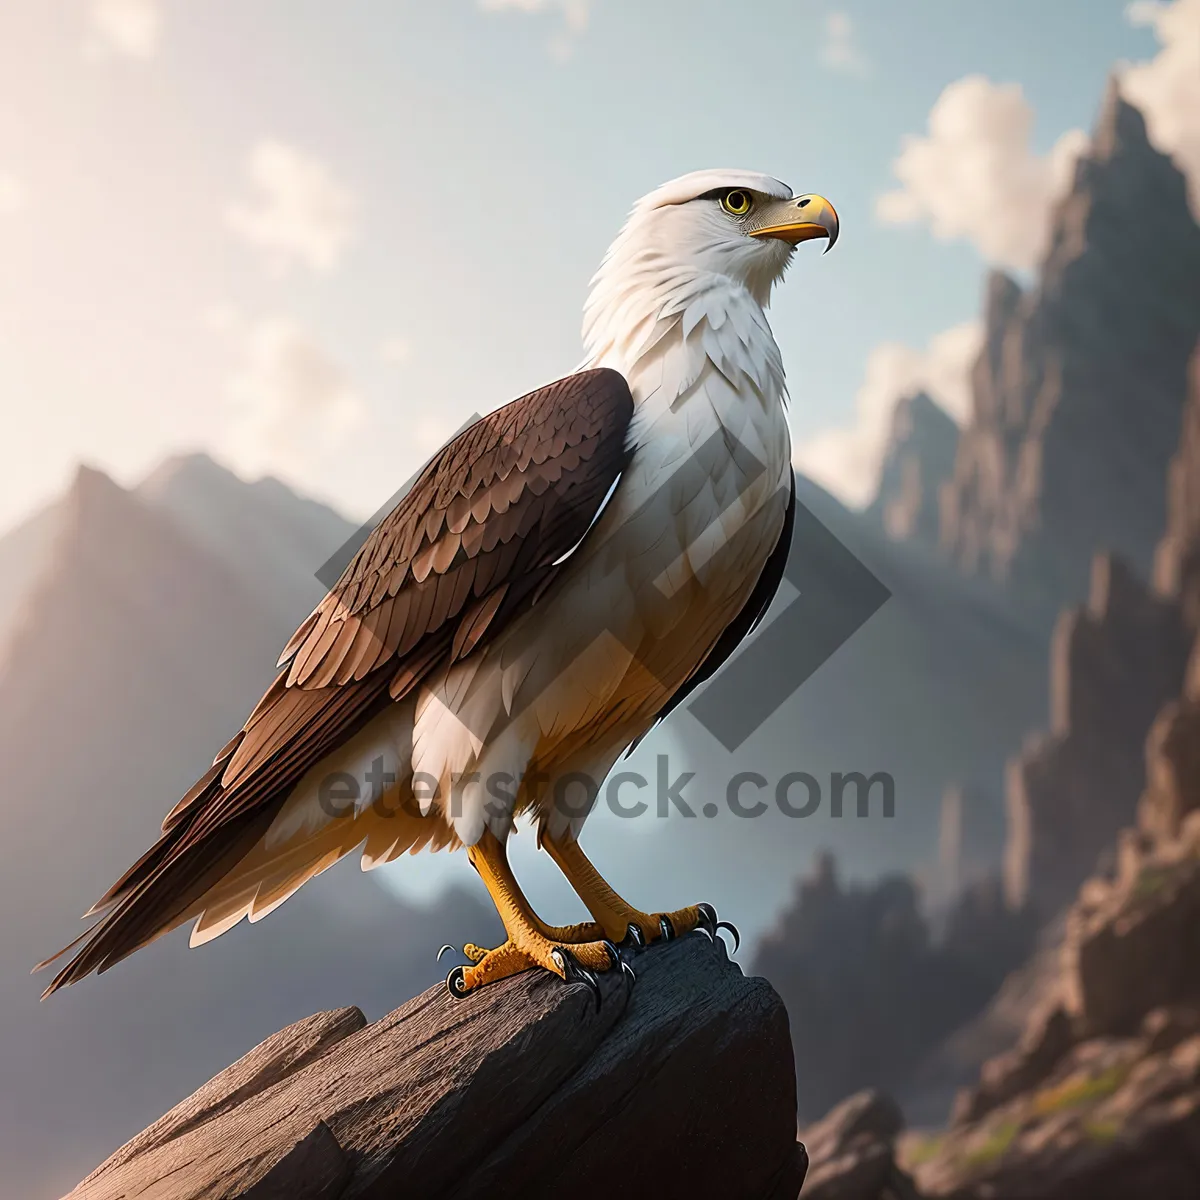 Picture of Majestic Hunter: A Falcon's Watchful Eye